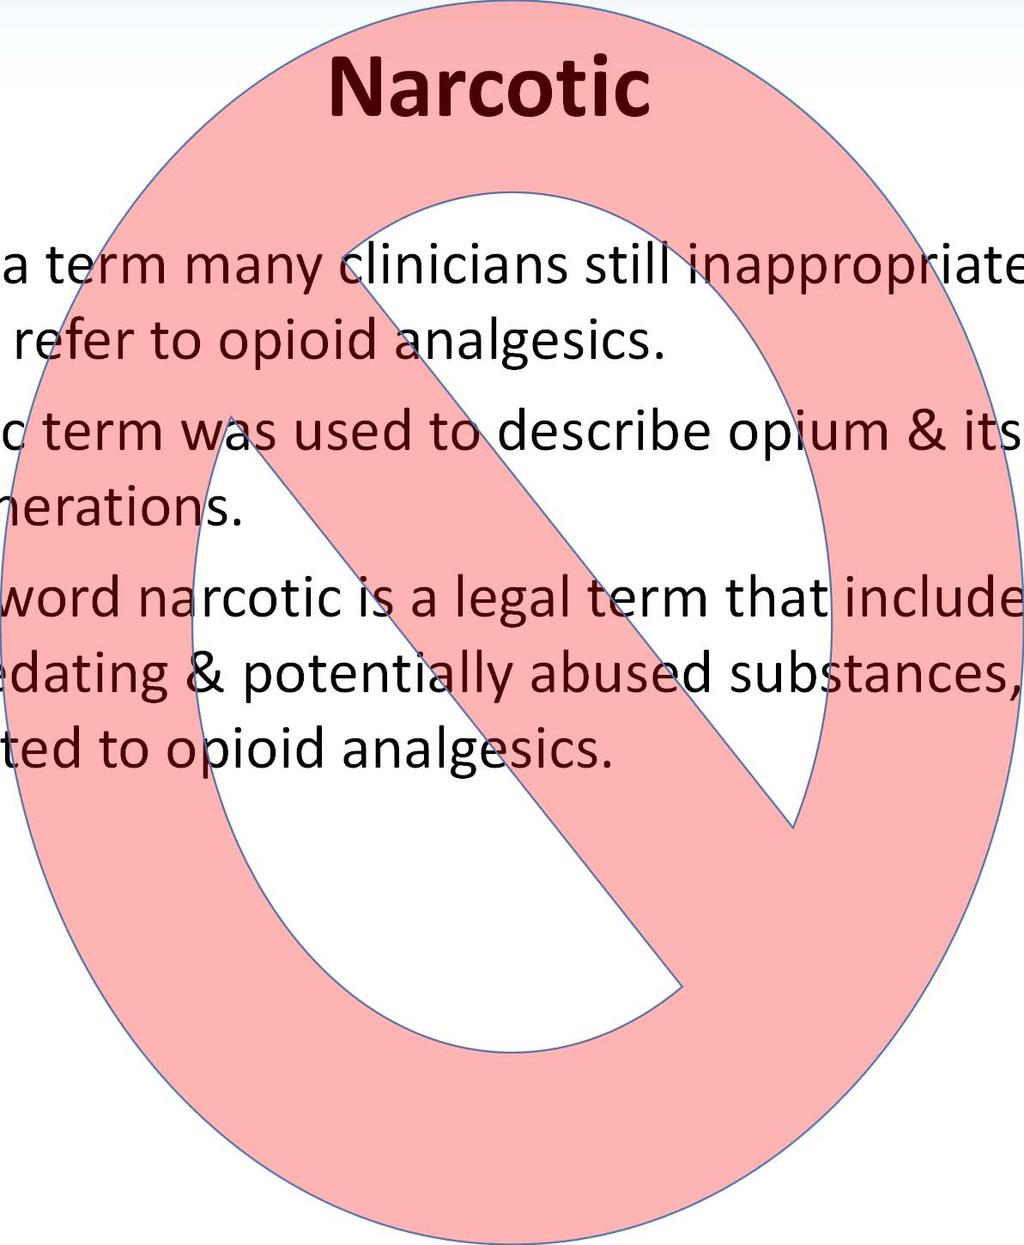 Today the word narcotic is a legal term that includes a